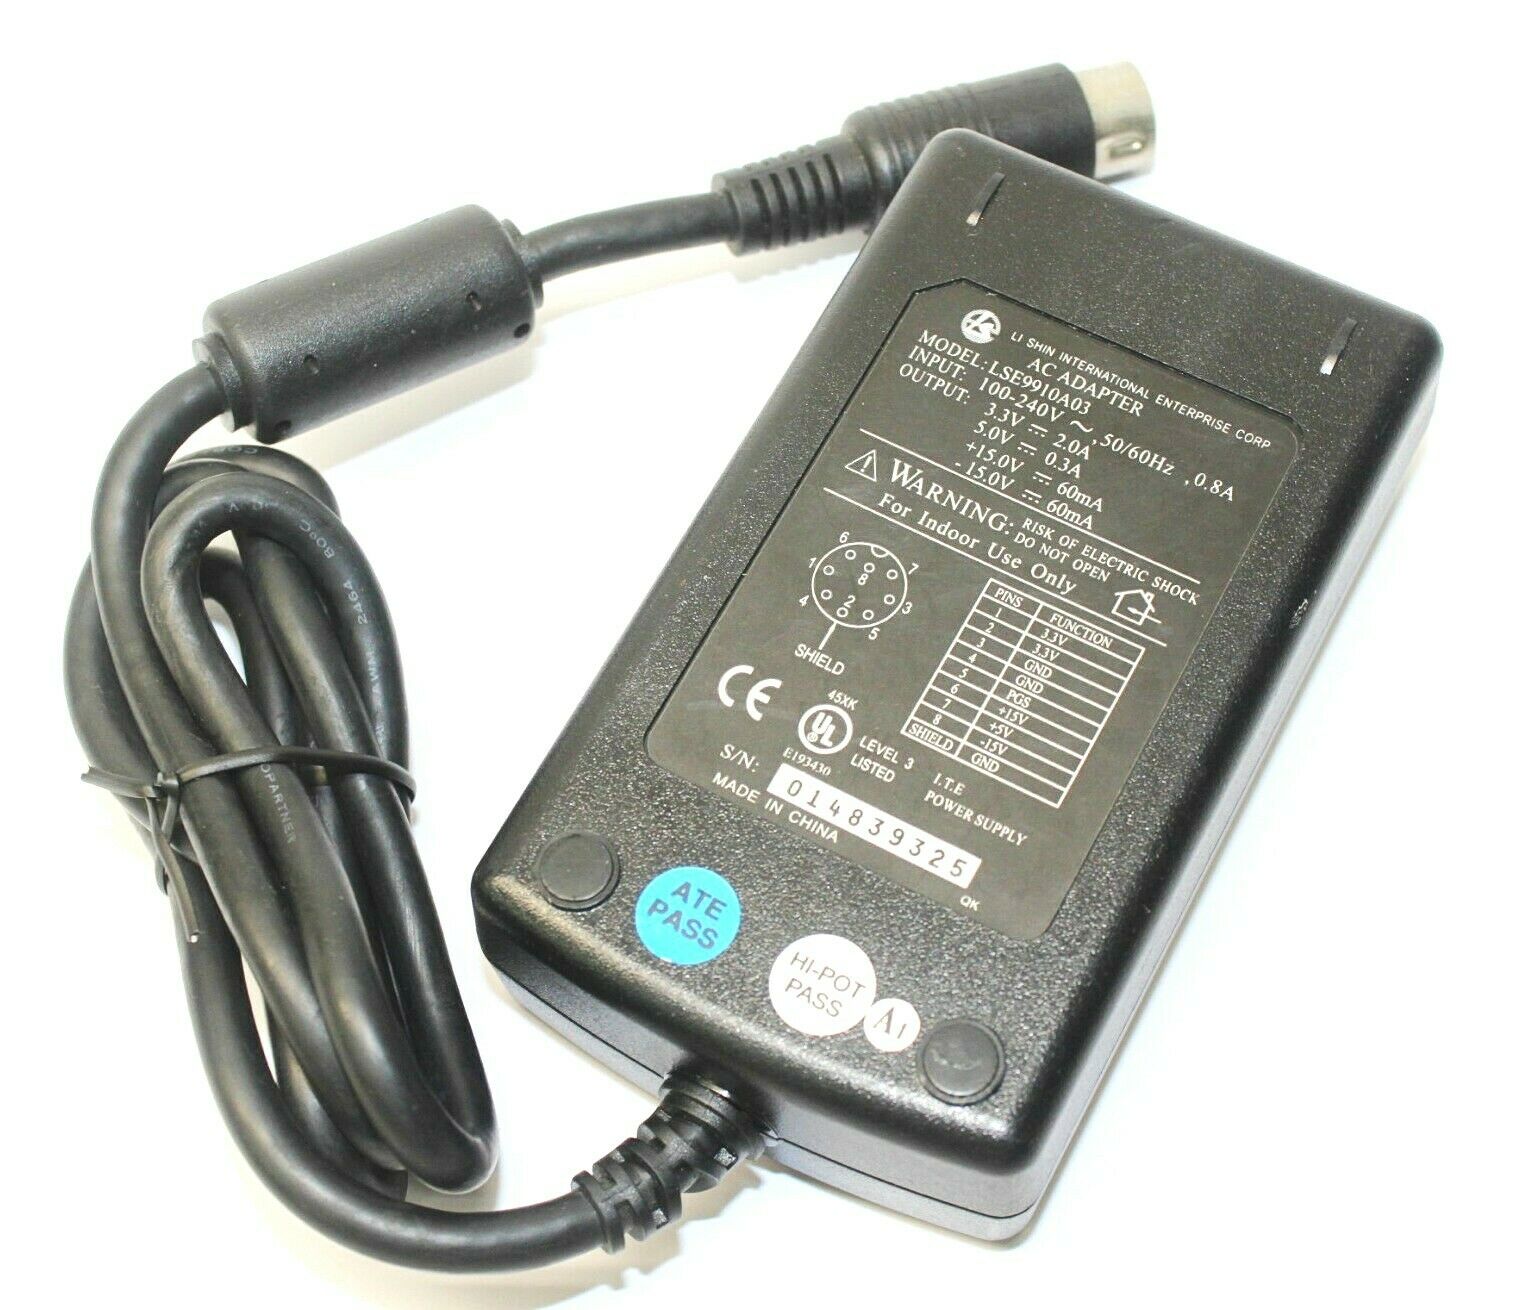 LiShin LSE9910A03 Ac Adapter Power Supply Cord Cable Charger Genuine Original